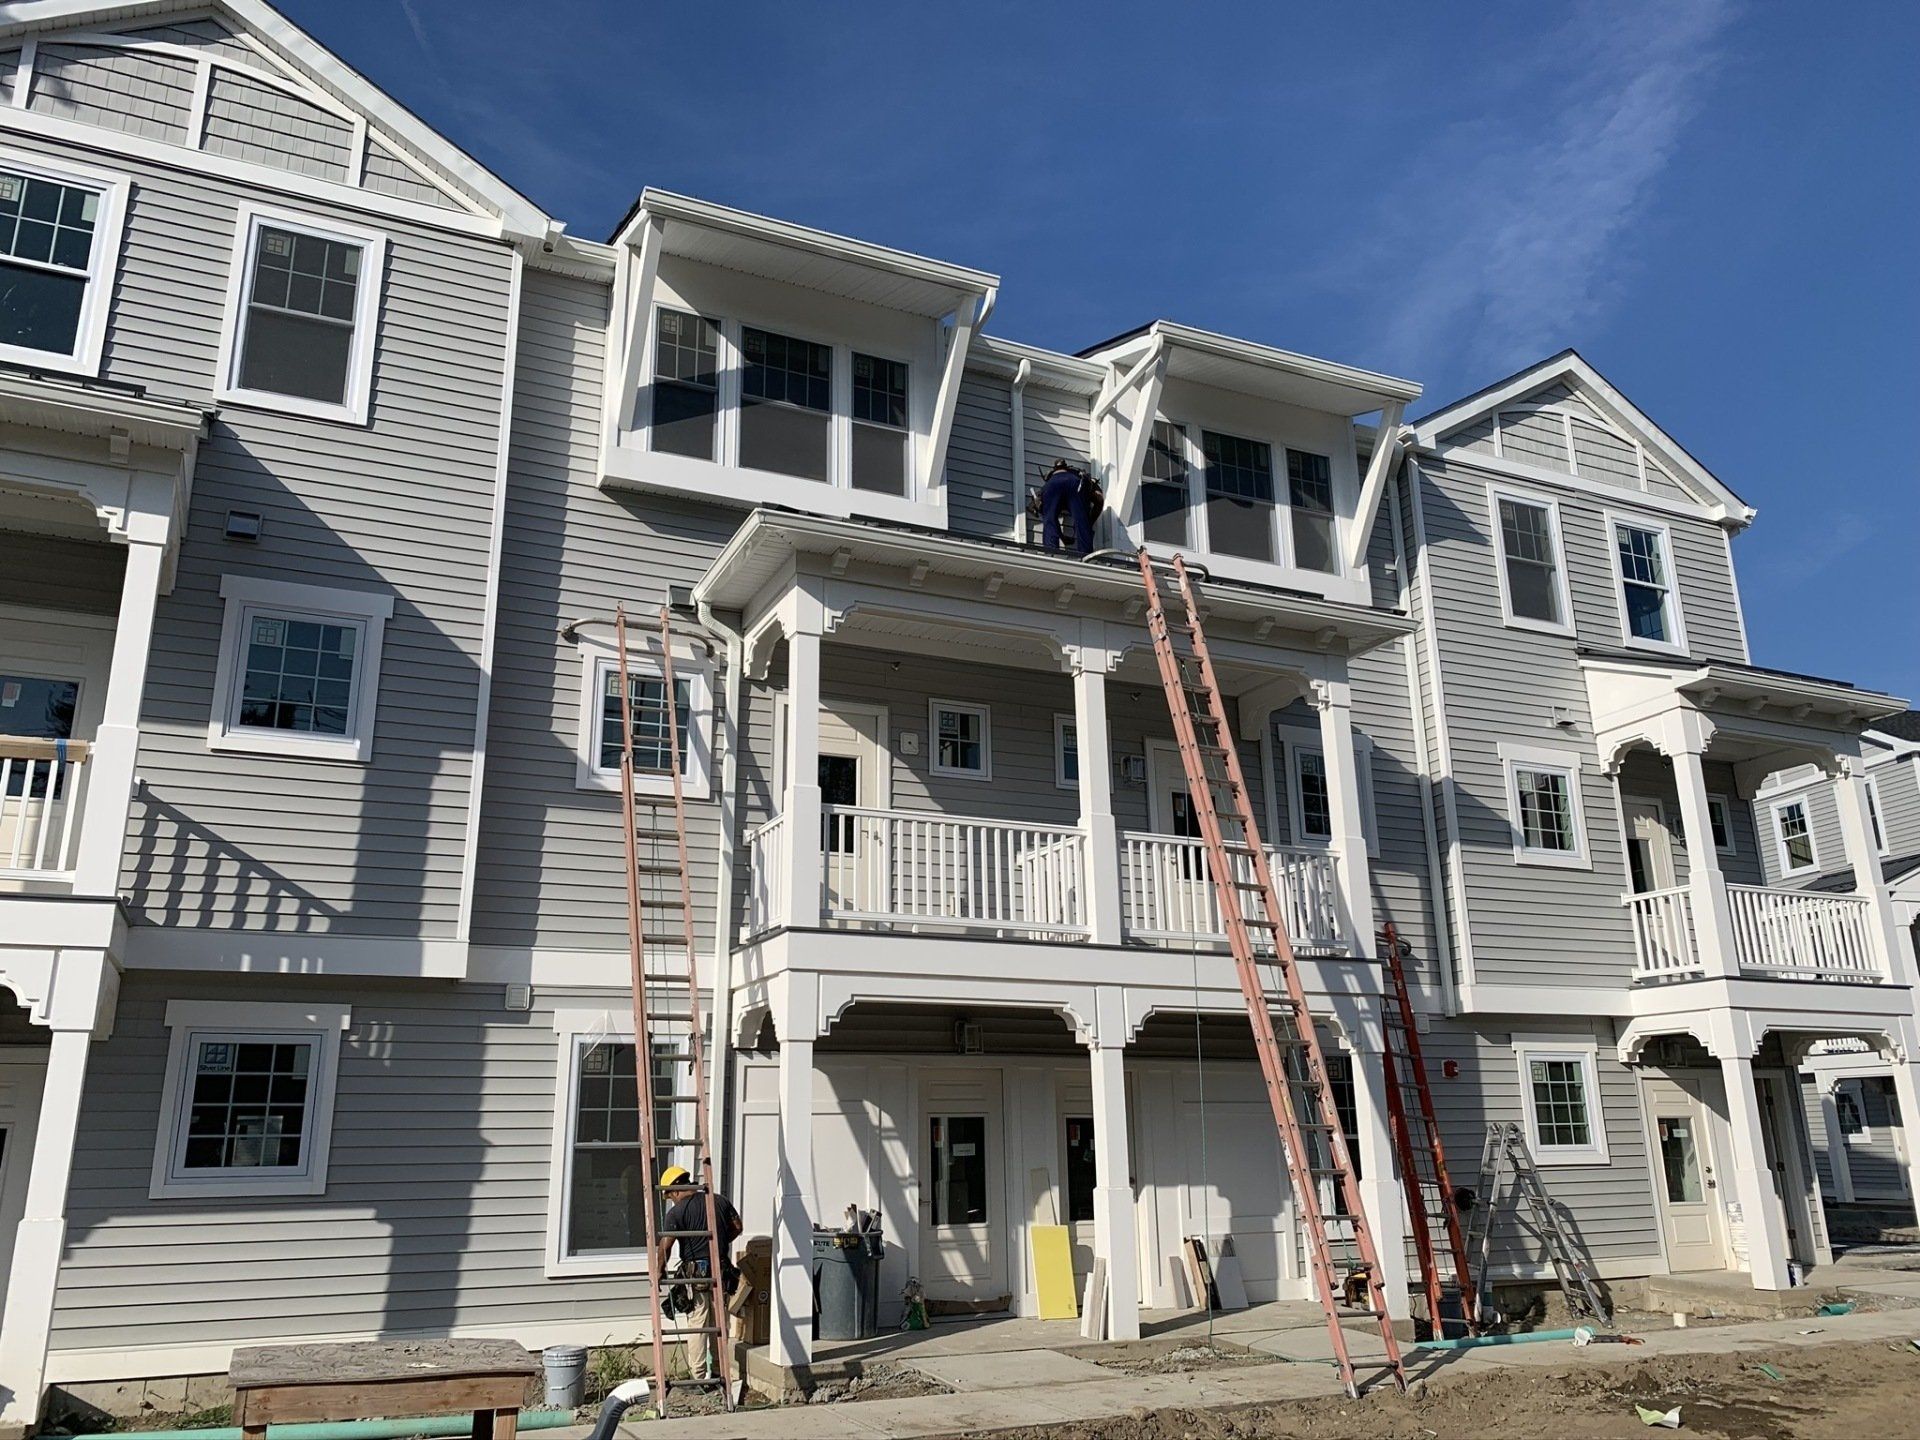 Gutter Connection - Dutchess County, NY - A & J Sons Builders Corp